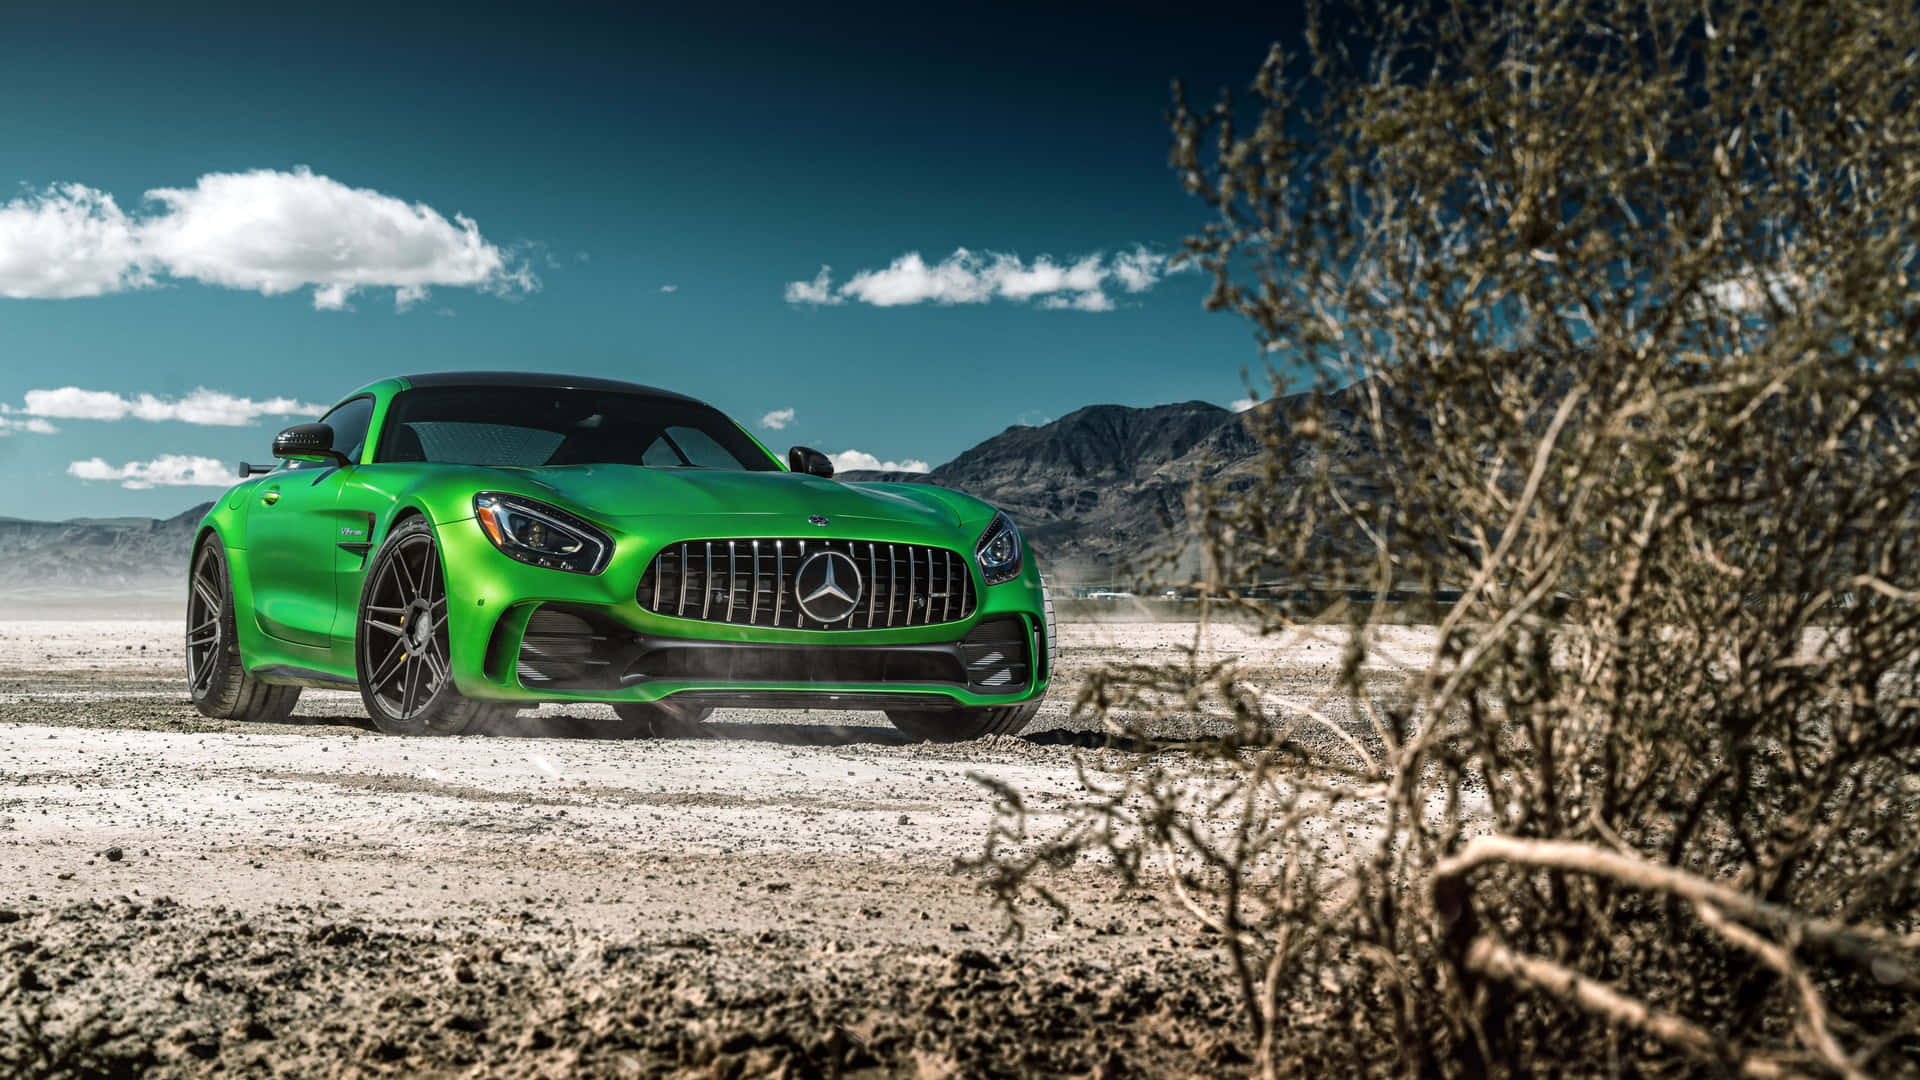 "The Mercedes-AMG GT: Luxury and Style at its Finest" Wallpaper